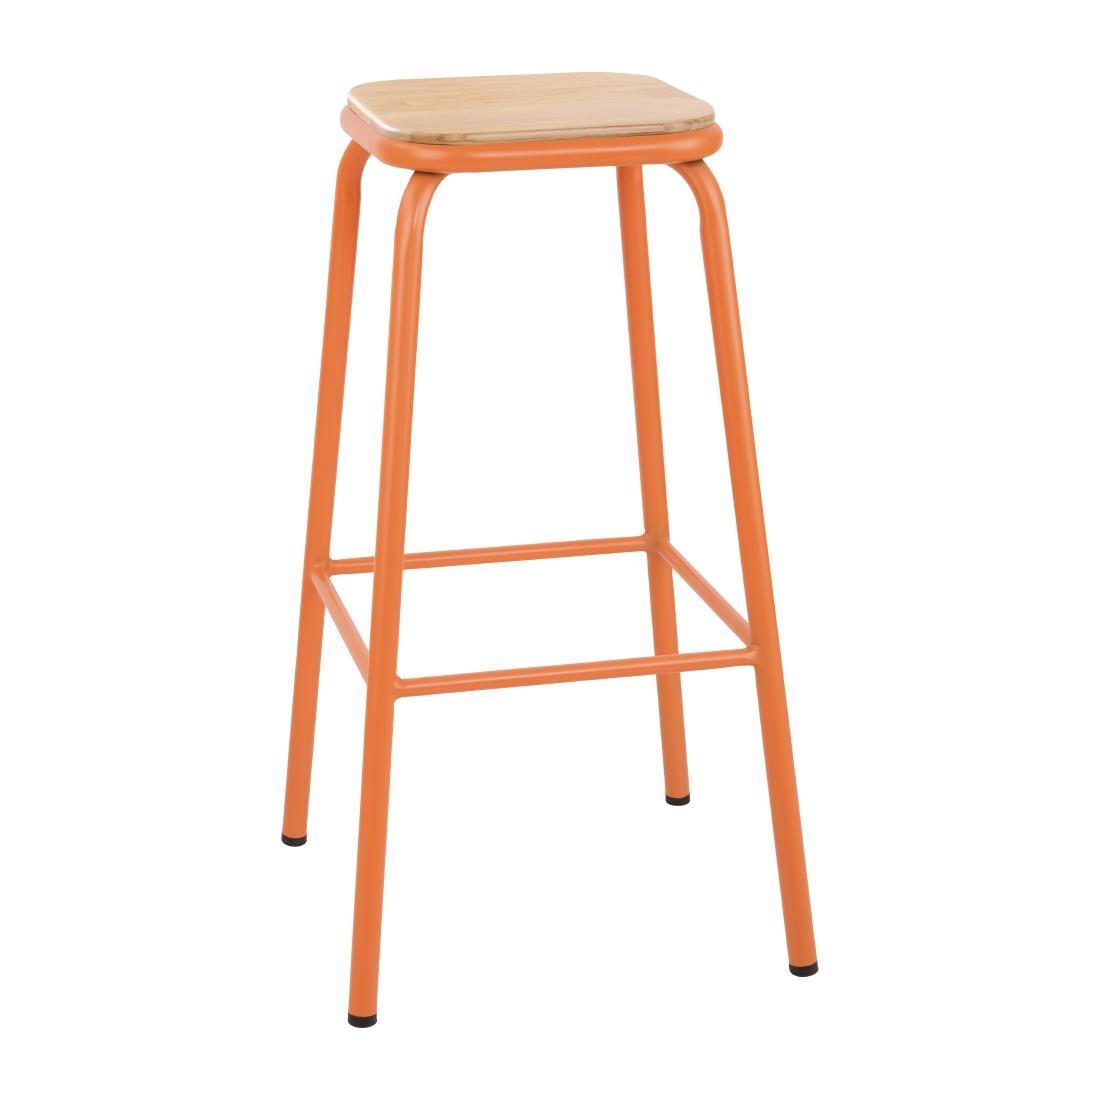 Bolero Cantina High Stools with Wooden Seat Pad Orange (Pack of 4) - FB940  - 1